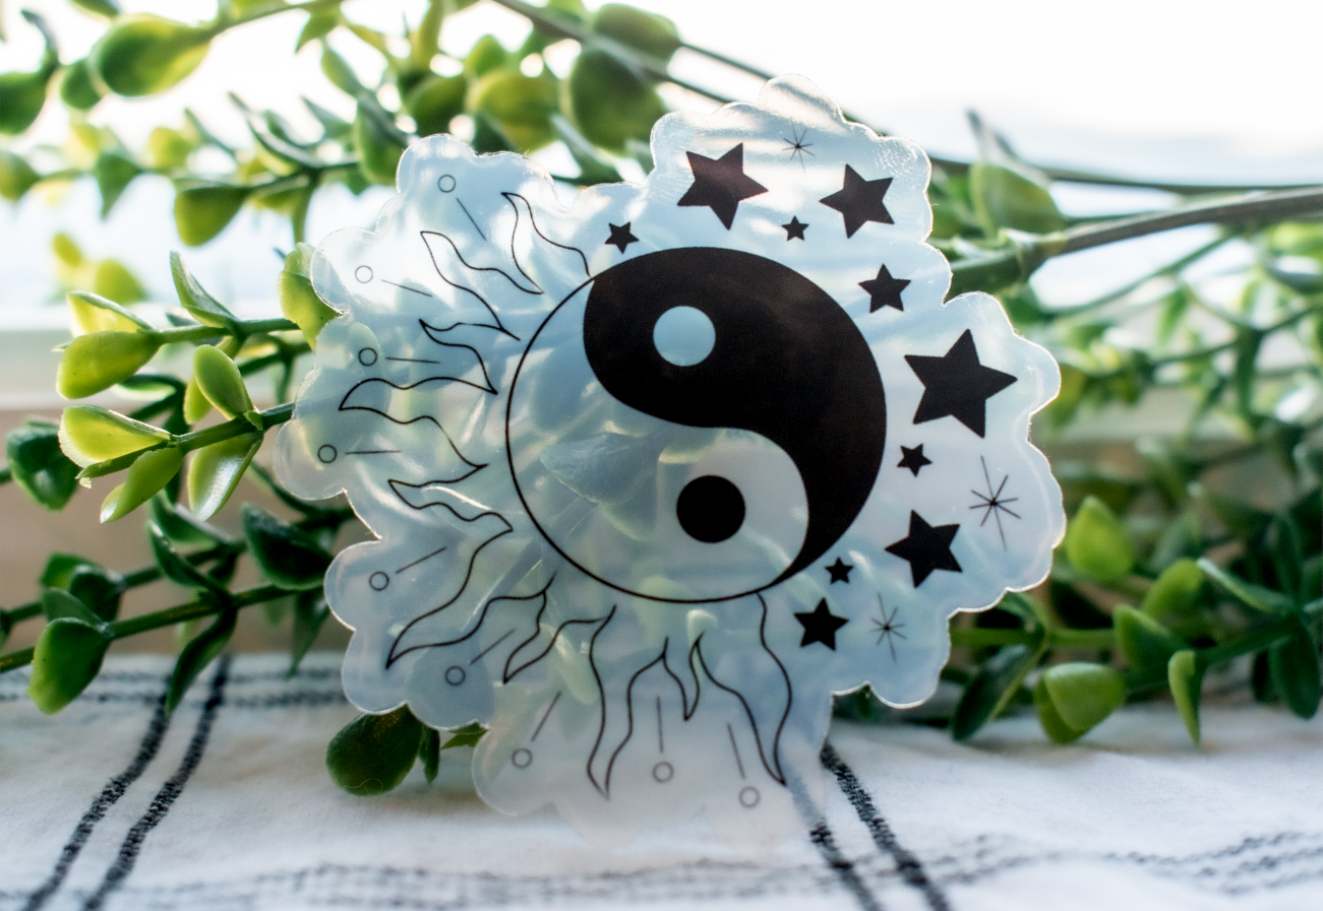 Celestial Yin & Yang Transparent Sticker Black & White | perfect gift | aesthetic stickers | transparent stickers | free shipping